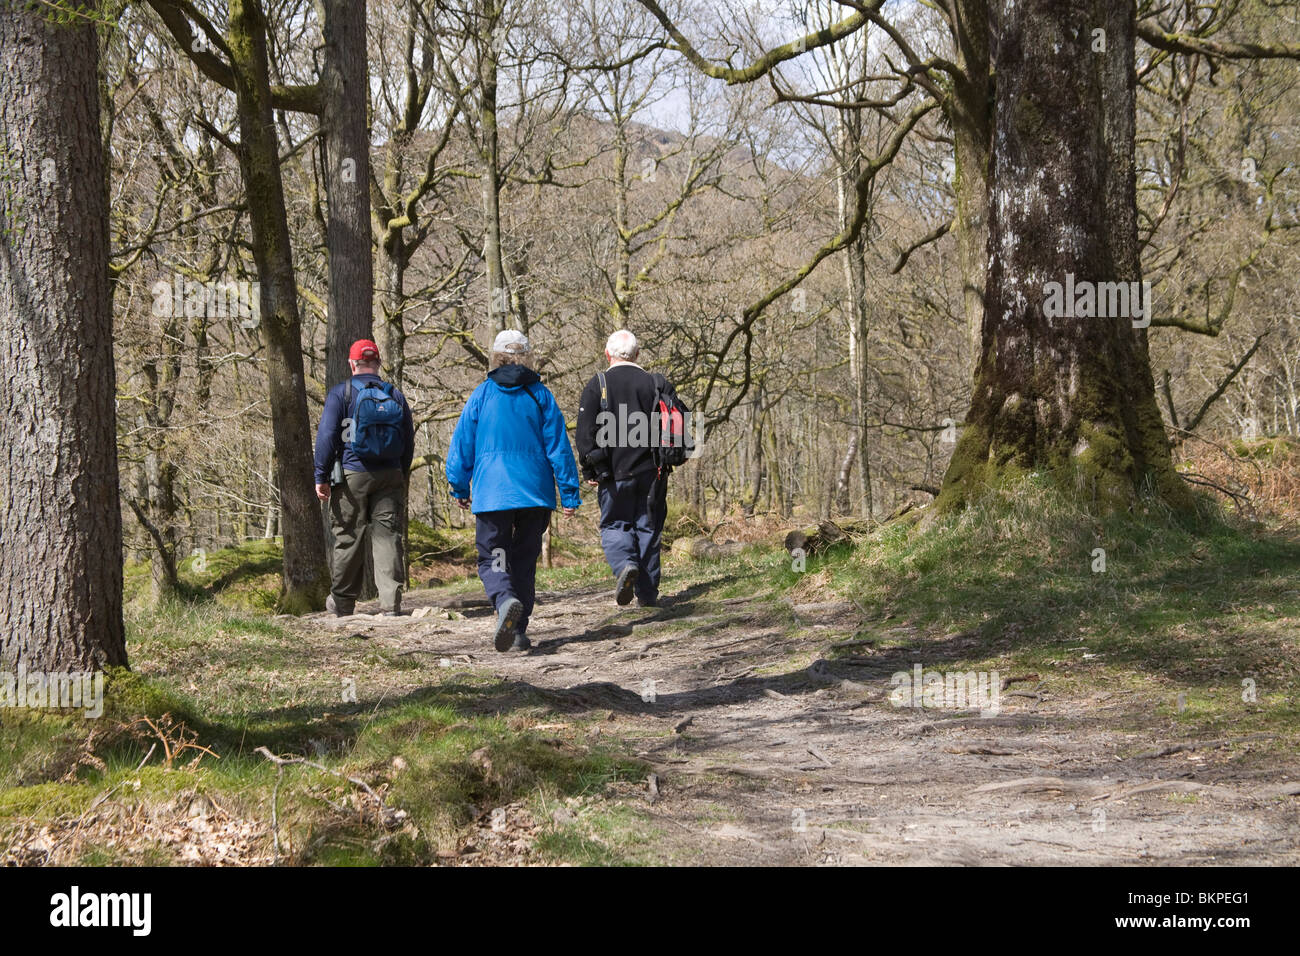 Lake District Cumbria England UK Three elderly walkers walking through a wooded area on a public footpath Stock Photo